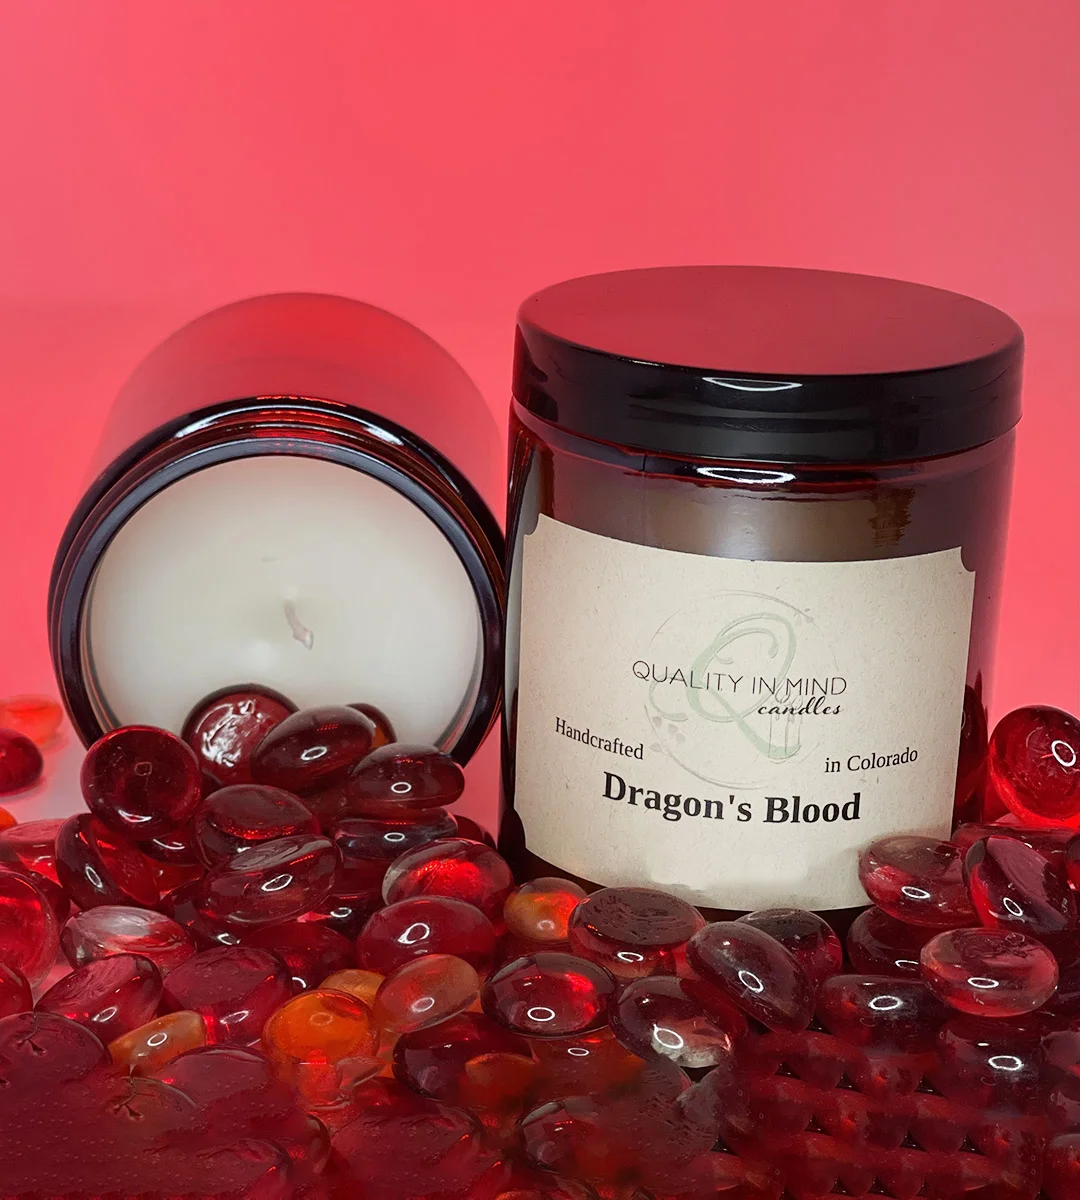 Candle in Dragon's Blood Scent surrounded by red stones